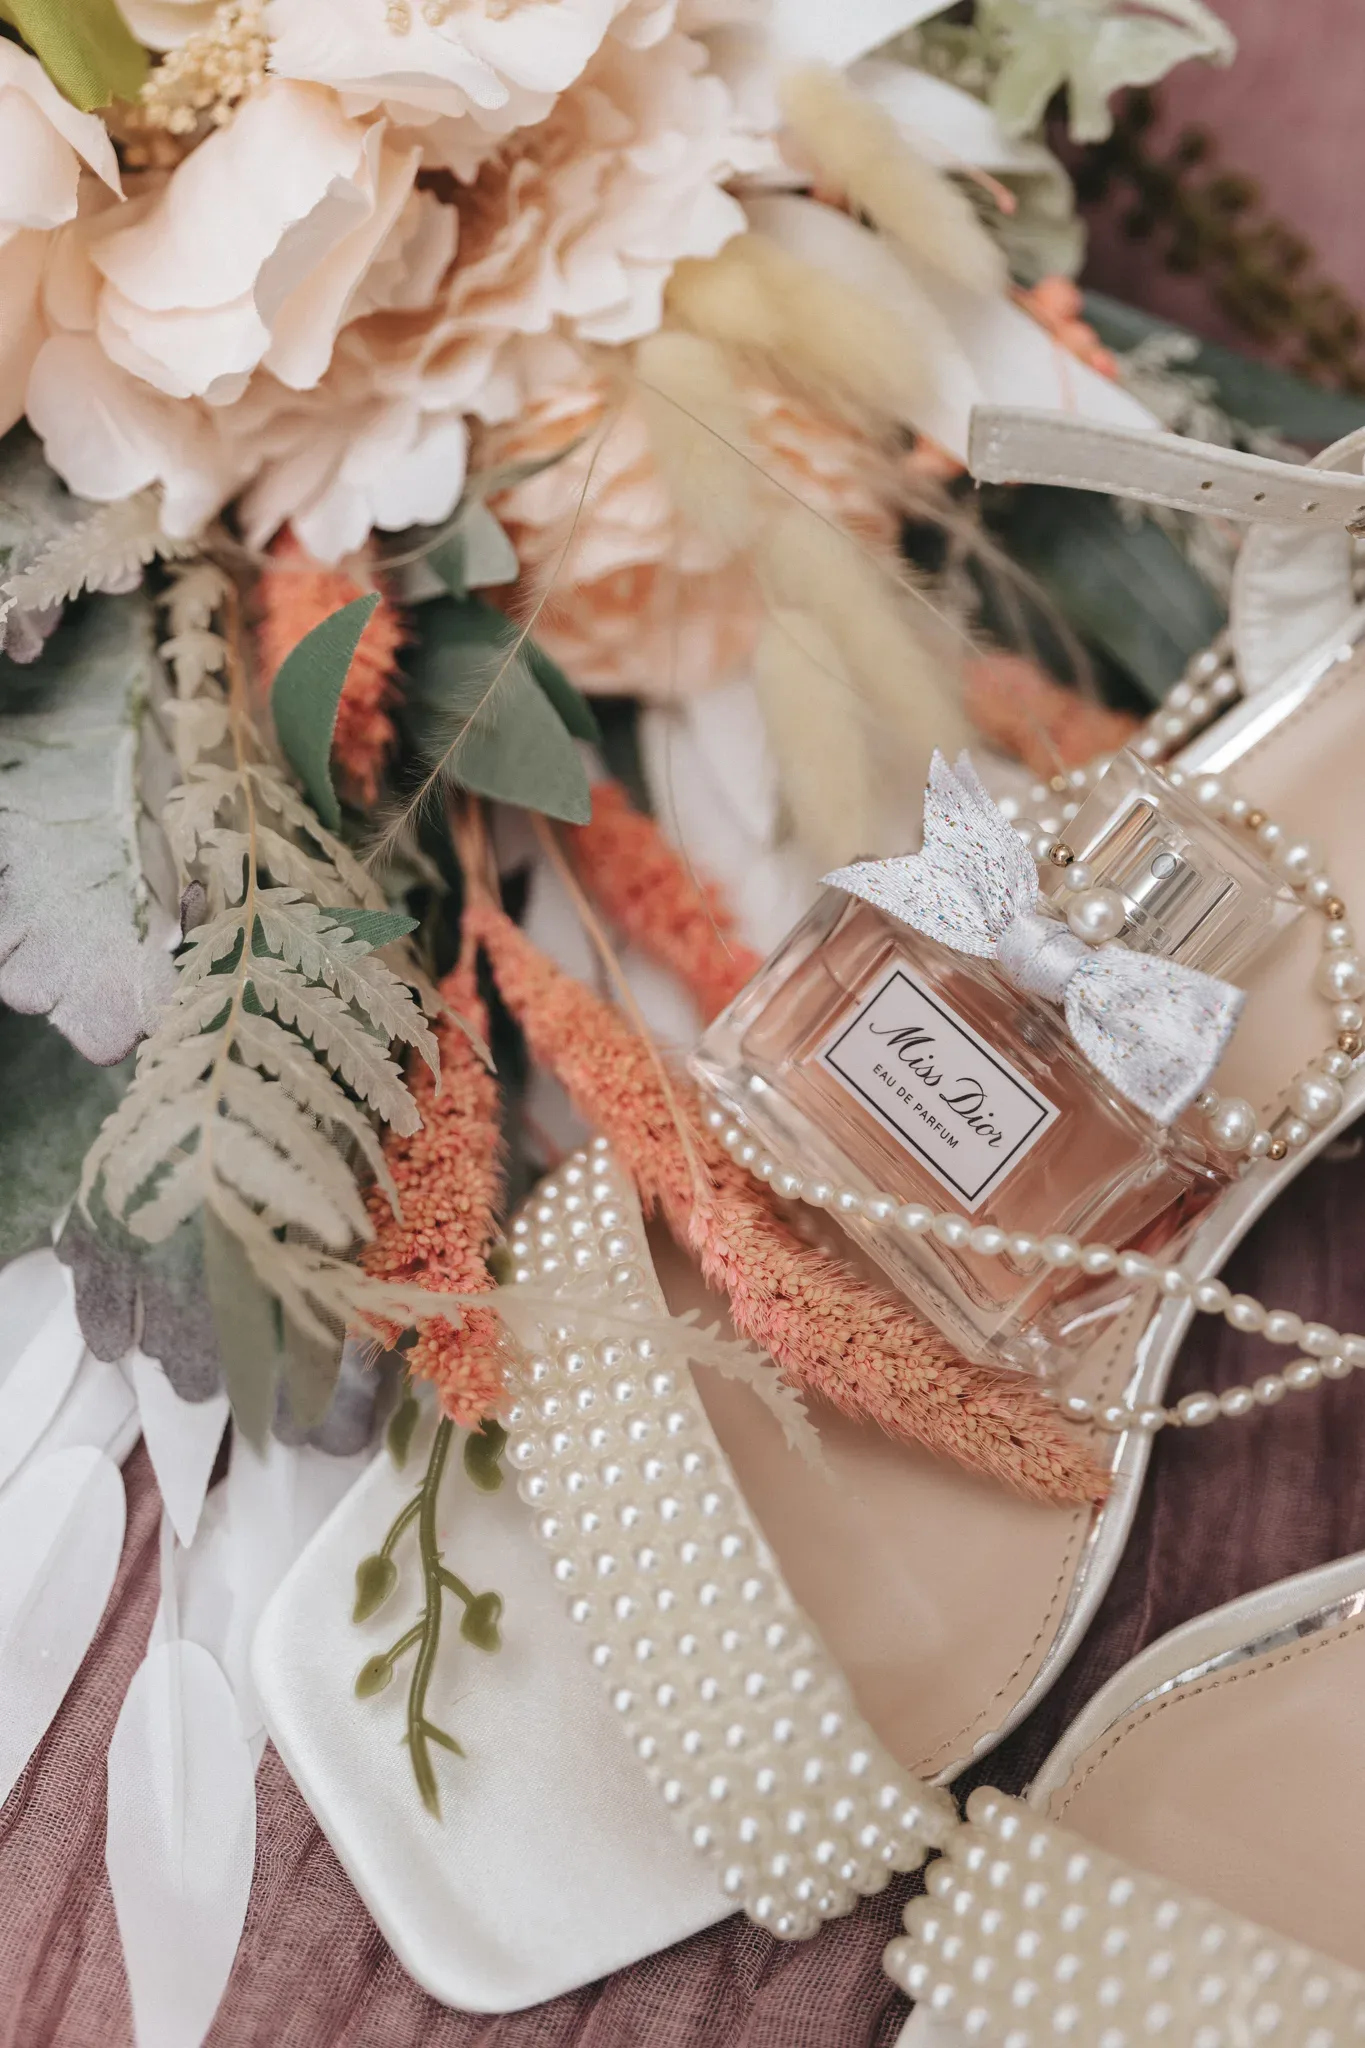 A close-up image of a perfume bottle labeled "miss dior" placed on women's shoes adorned with pearls and surrounded by vibrant floral arrangements and greenery on a textured pink surface.